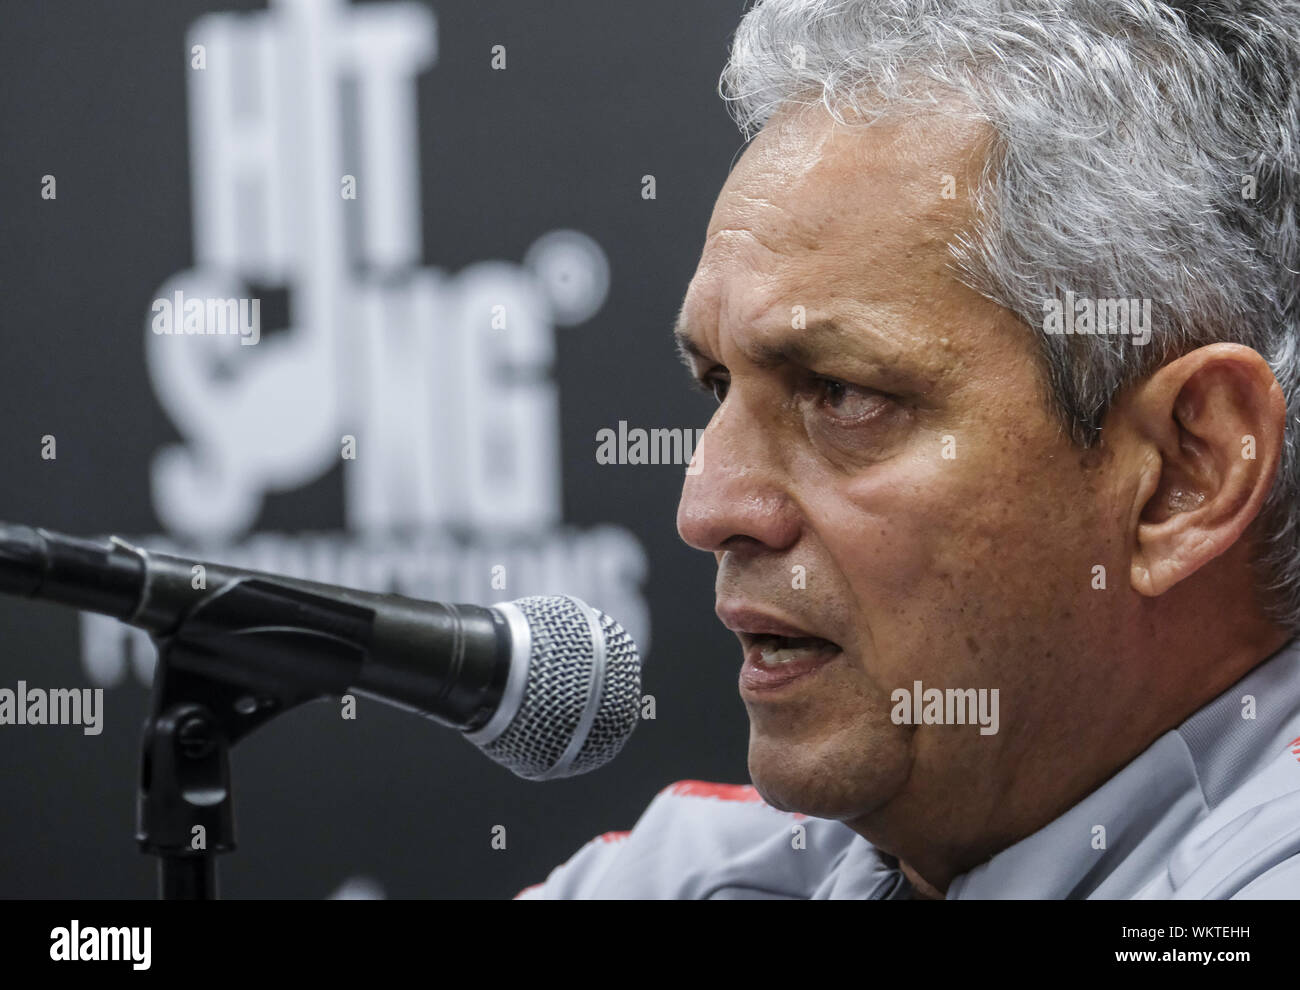 Los Angeles, California, USA. 4th Sep, 2019. Chile's coach Reinaldo Rueda speaks during a press conference in Los Angeles, Wednesday, September 4, 2019. Chile will face Argentina in an International friendly soccer game on September 5 at the Los Angeles Memorial Coliseum. Credit: Ringo Chiu/ZUMA Wire/Alamy Live News Stock Photo